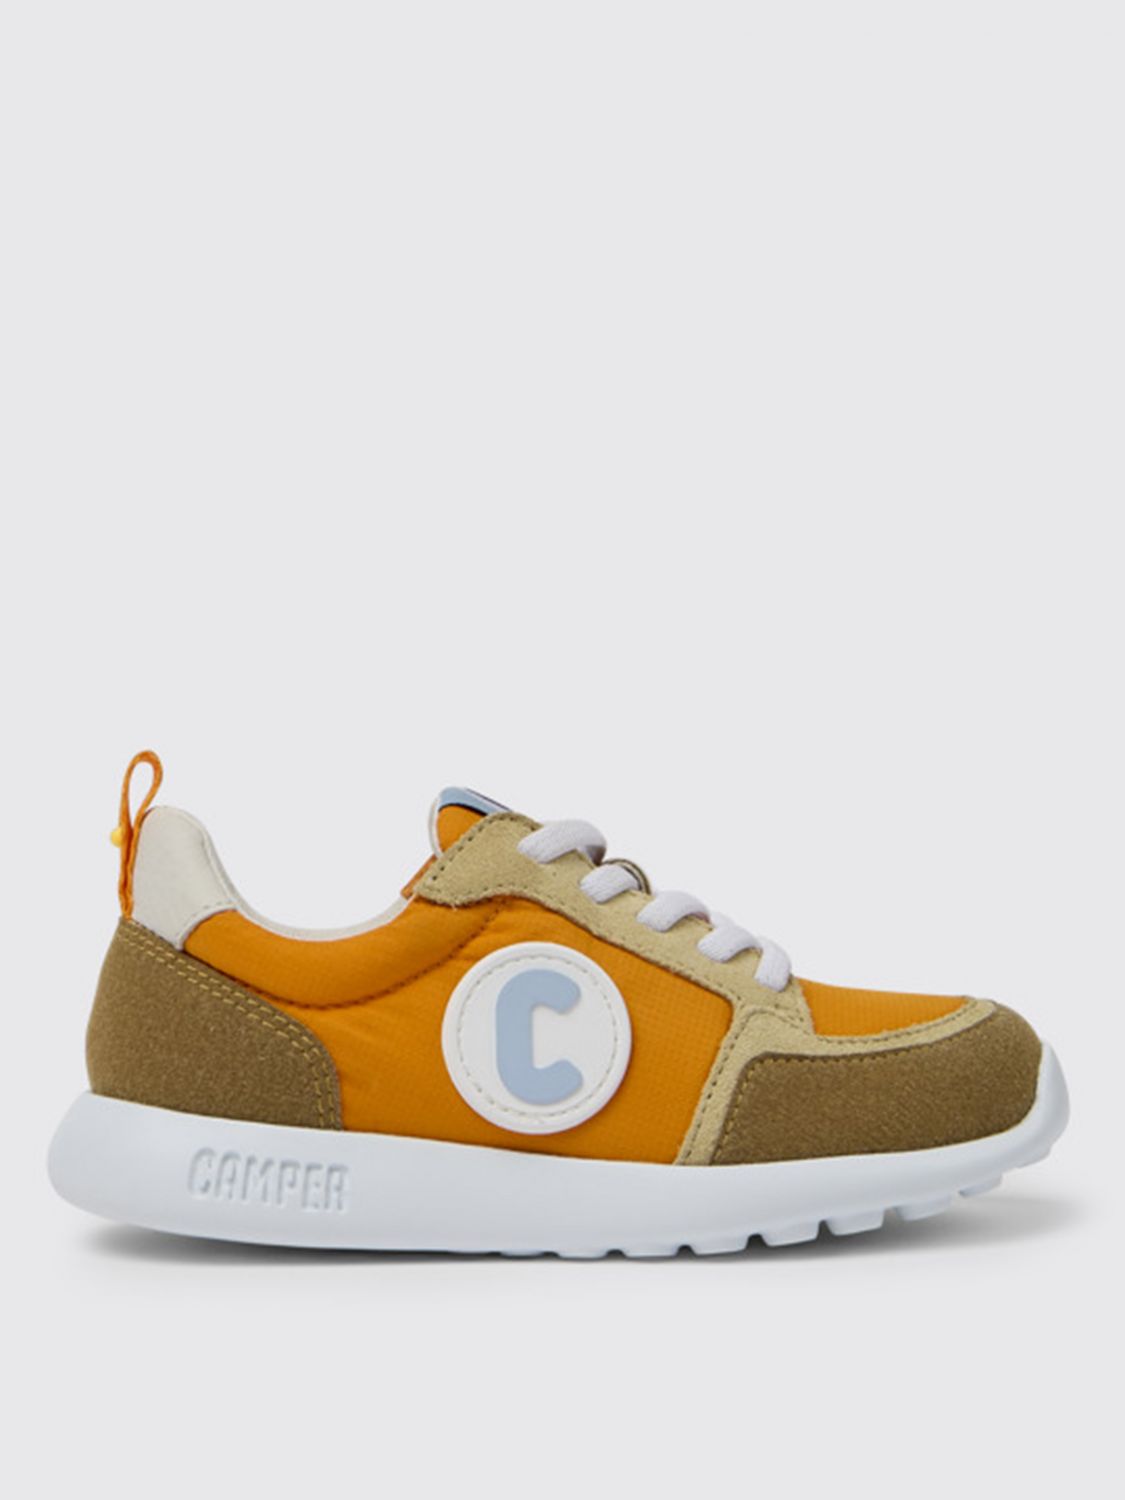 Camper Drift Camper sneakers in recycled polyester and fabric